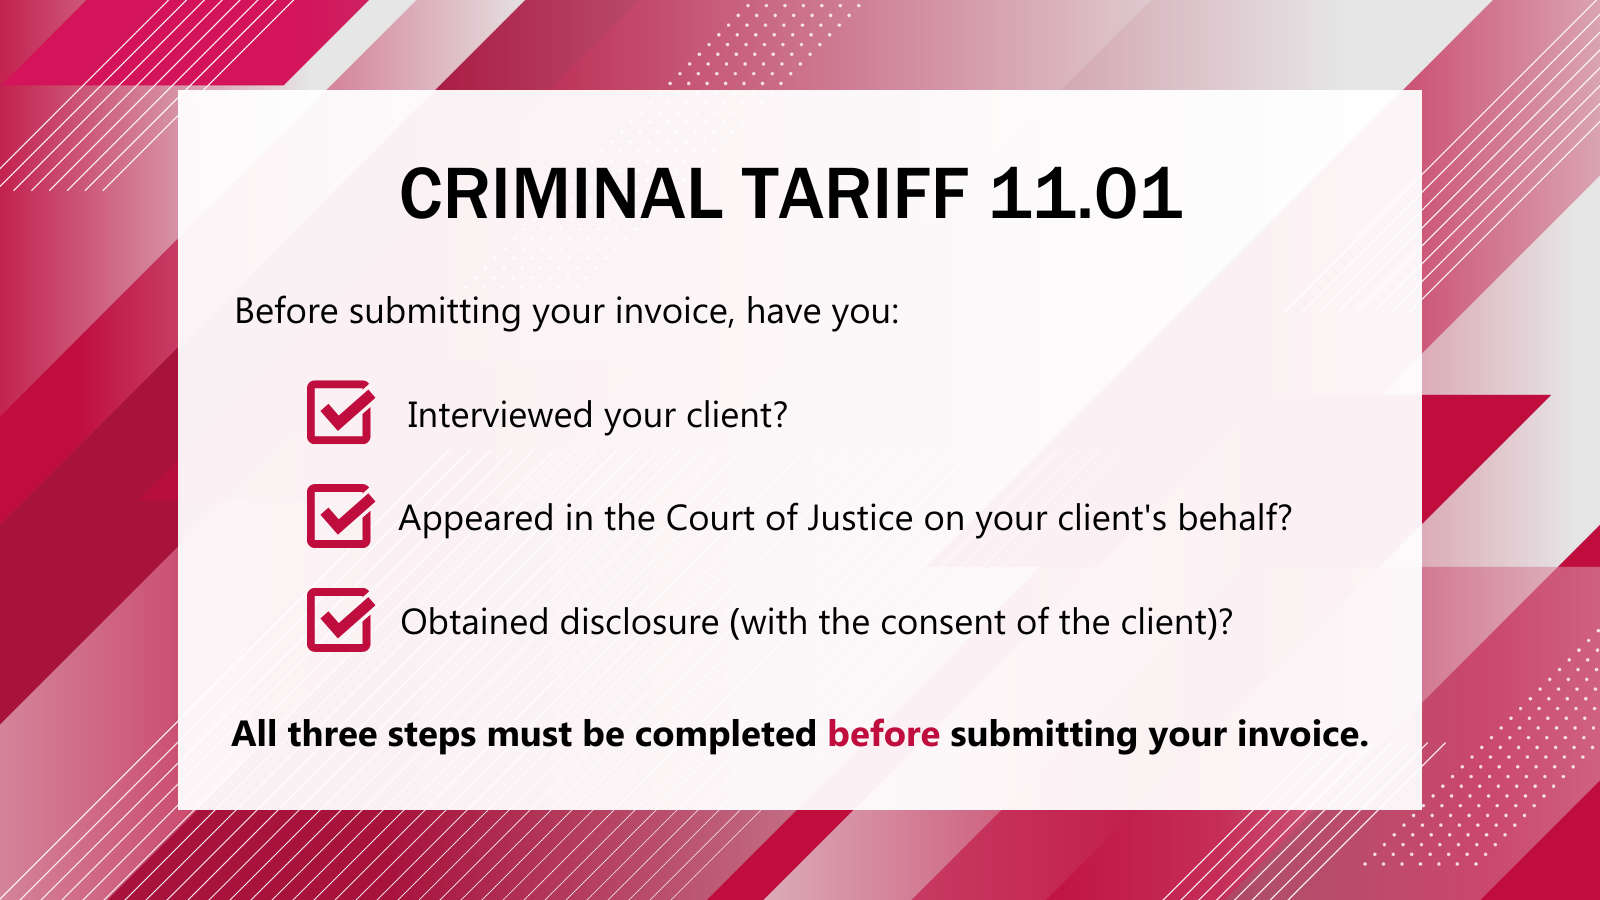 Criminal Tariff 11.01 explained. Three steps to complete before you invoice.